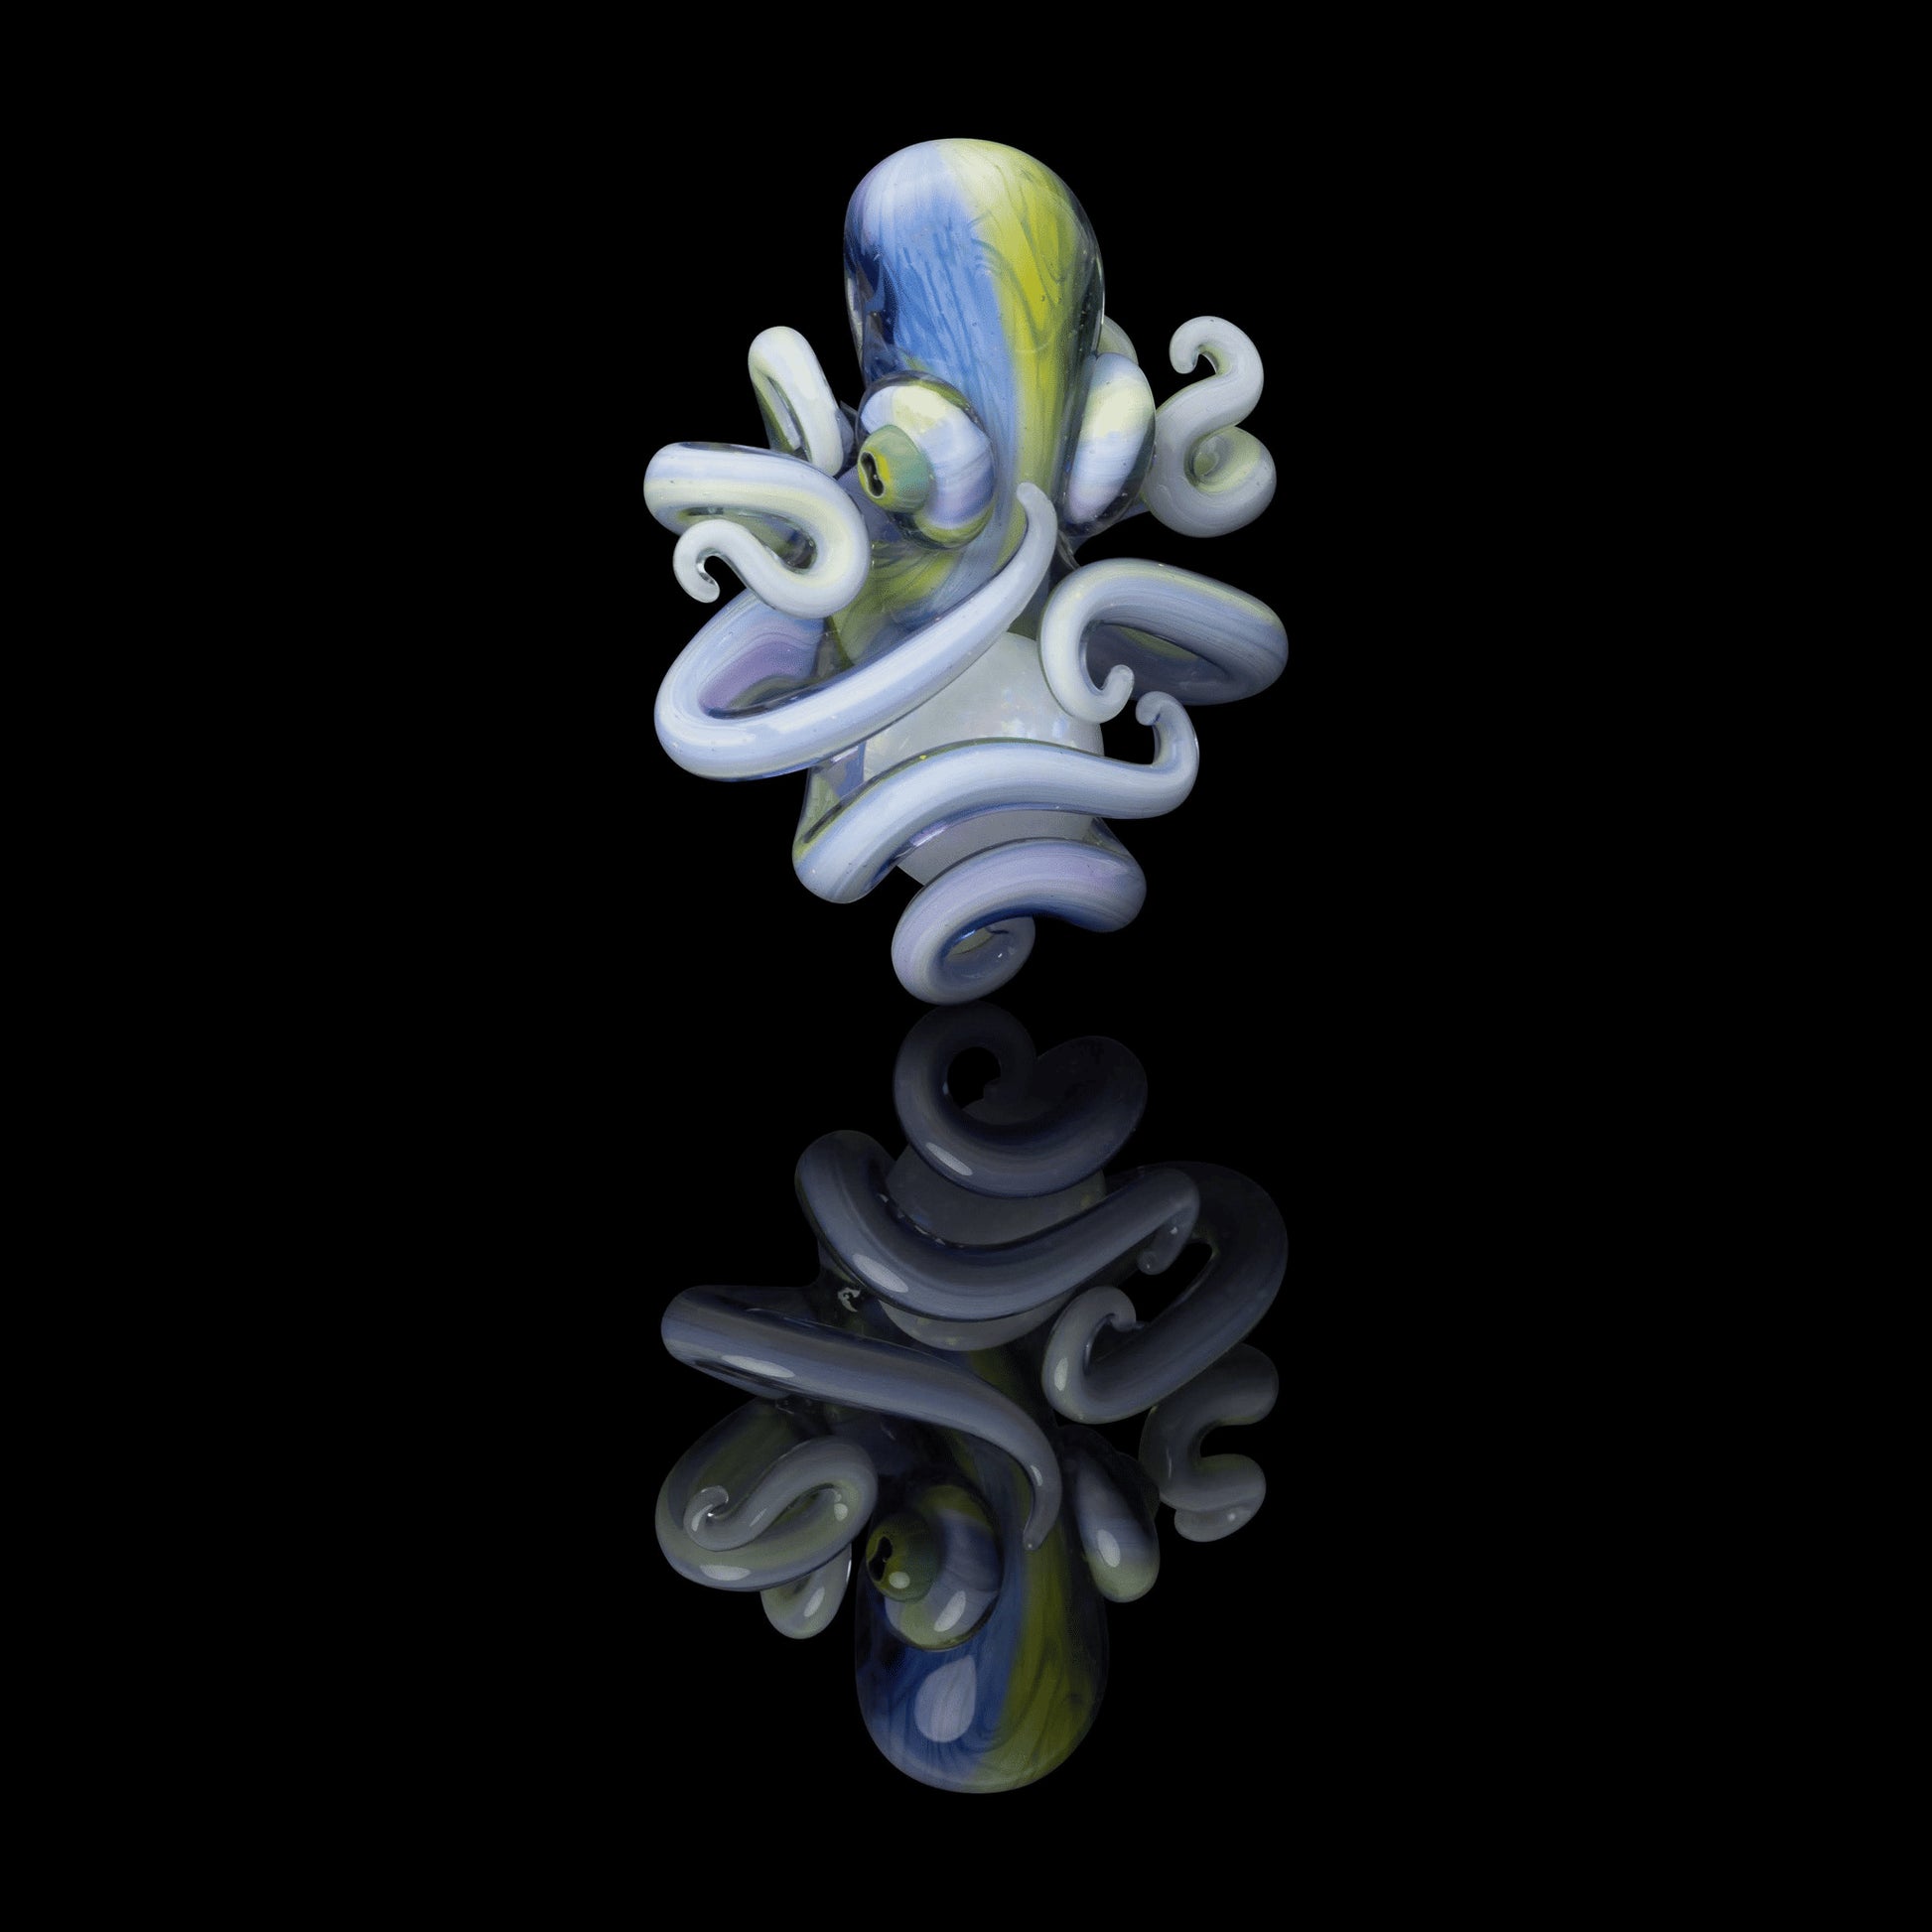 luxurious design of the Collab Octopus Pendant by Liz Wright x Scomo Moanet (Scribble Season 2022)